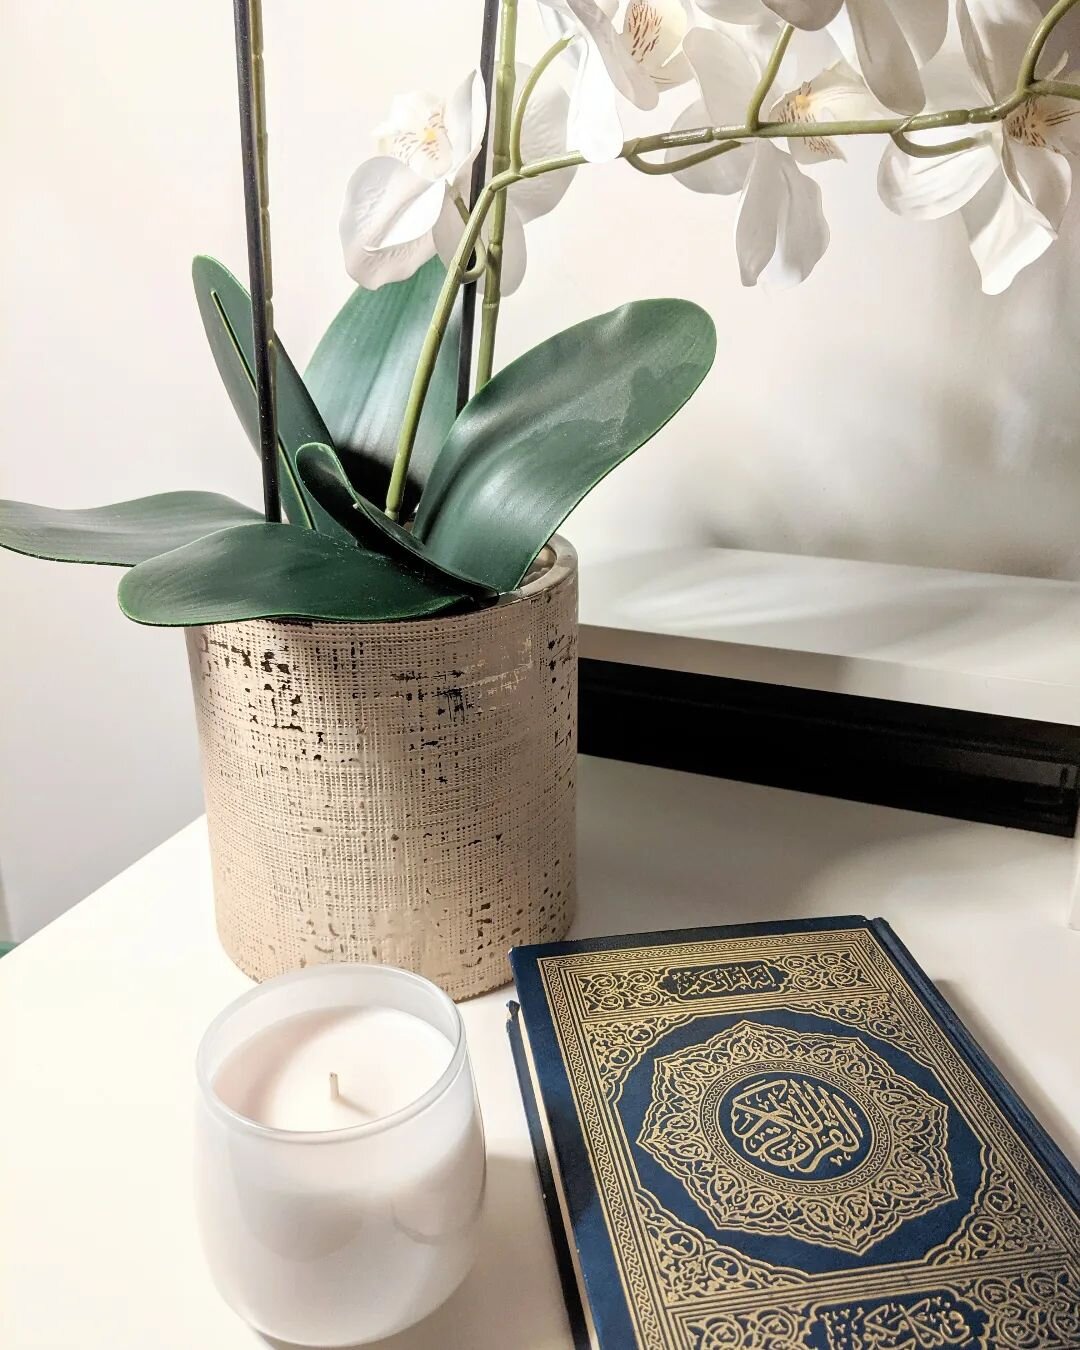 How I Memorize The Quran.⁣⁣
⁣⁣
I've heard about various methods and recently bought a few books on memorization techniques, but this is what I actually do:⁣⁣
⁣⁣
1️⃣ BISMILLAH. I seek Allah's protect, mention His Name and often make dua for ease in me